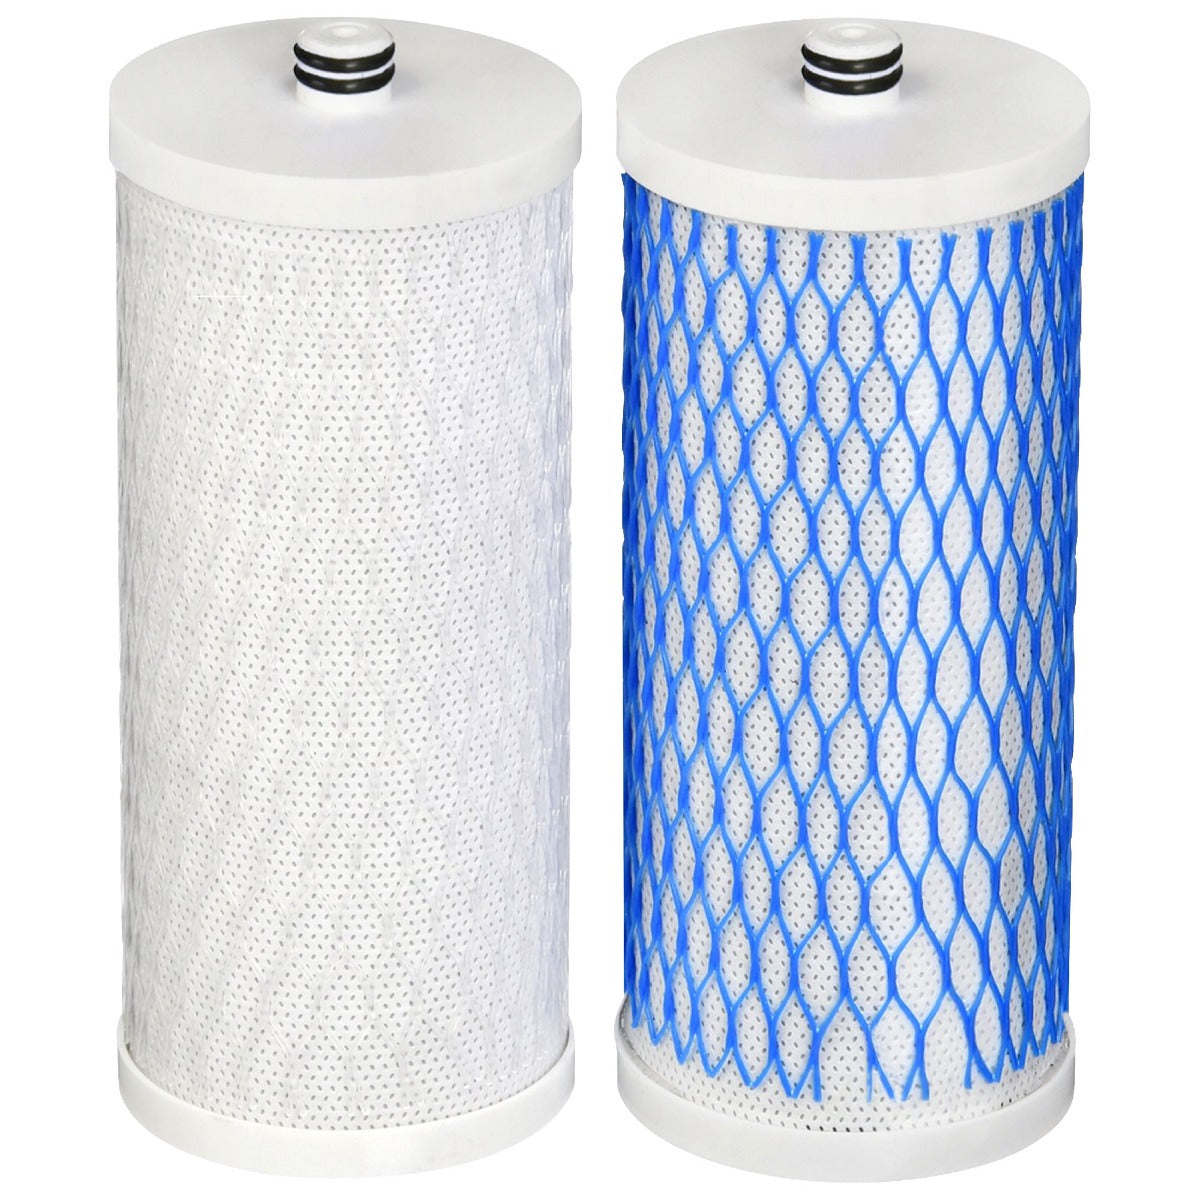 AQUACREST Replacement Water Filter for Aquasana 4035 & 4000, AQ4050, AQ4500 Drinking Water Systems